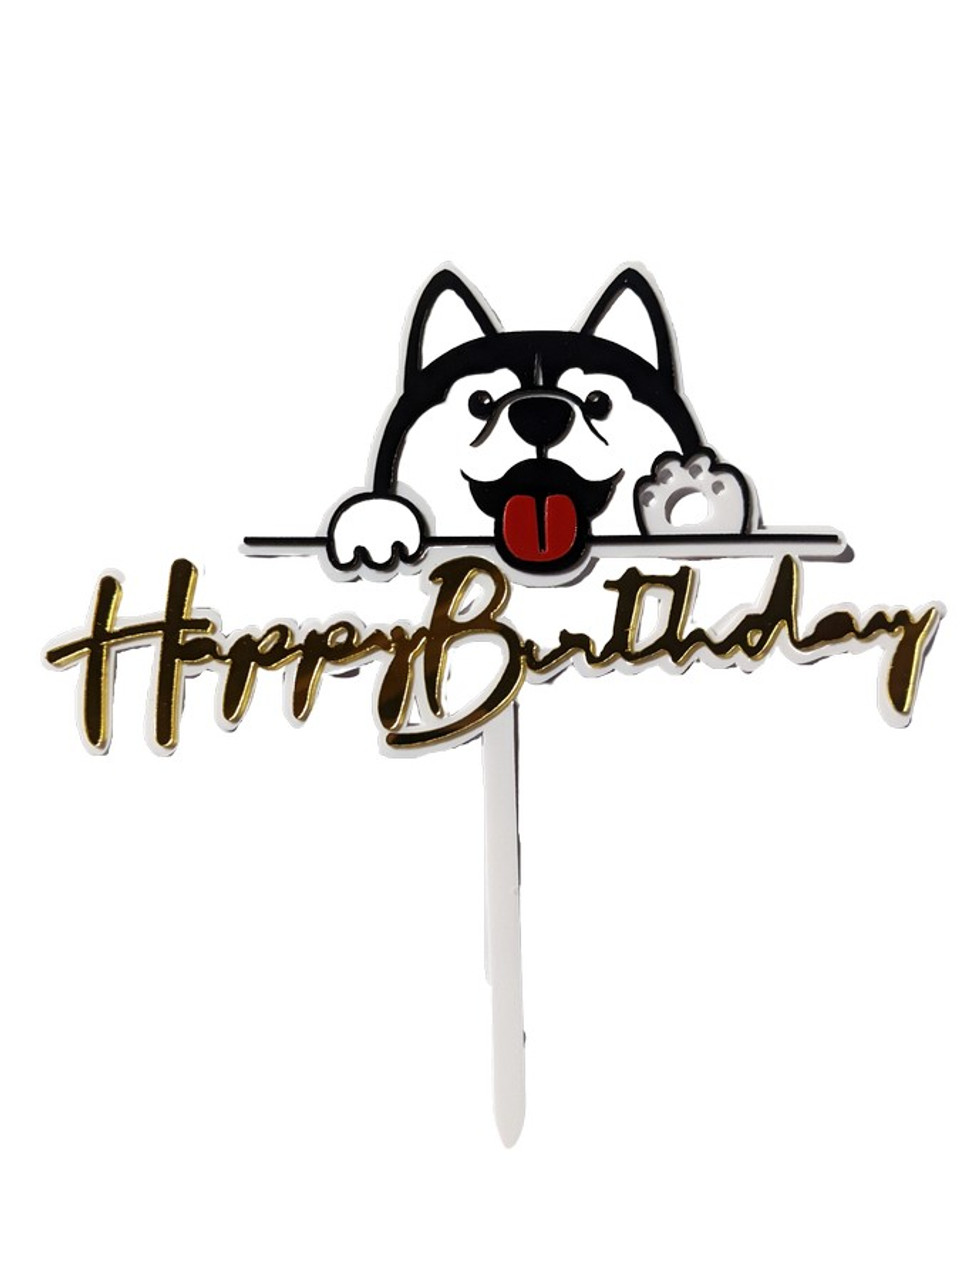 3rd Birthday Cat Cake Topper any color glitter 